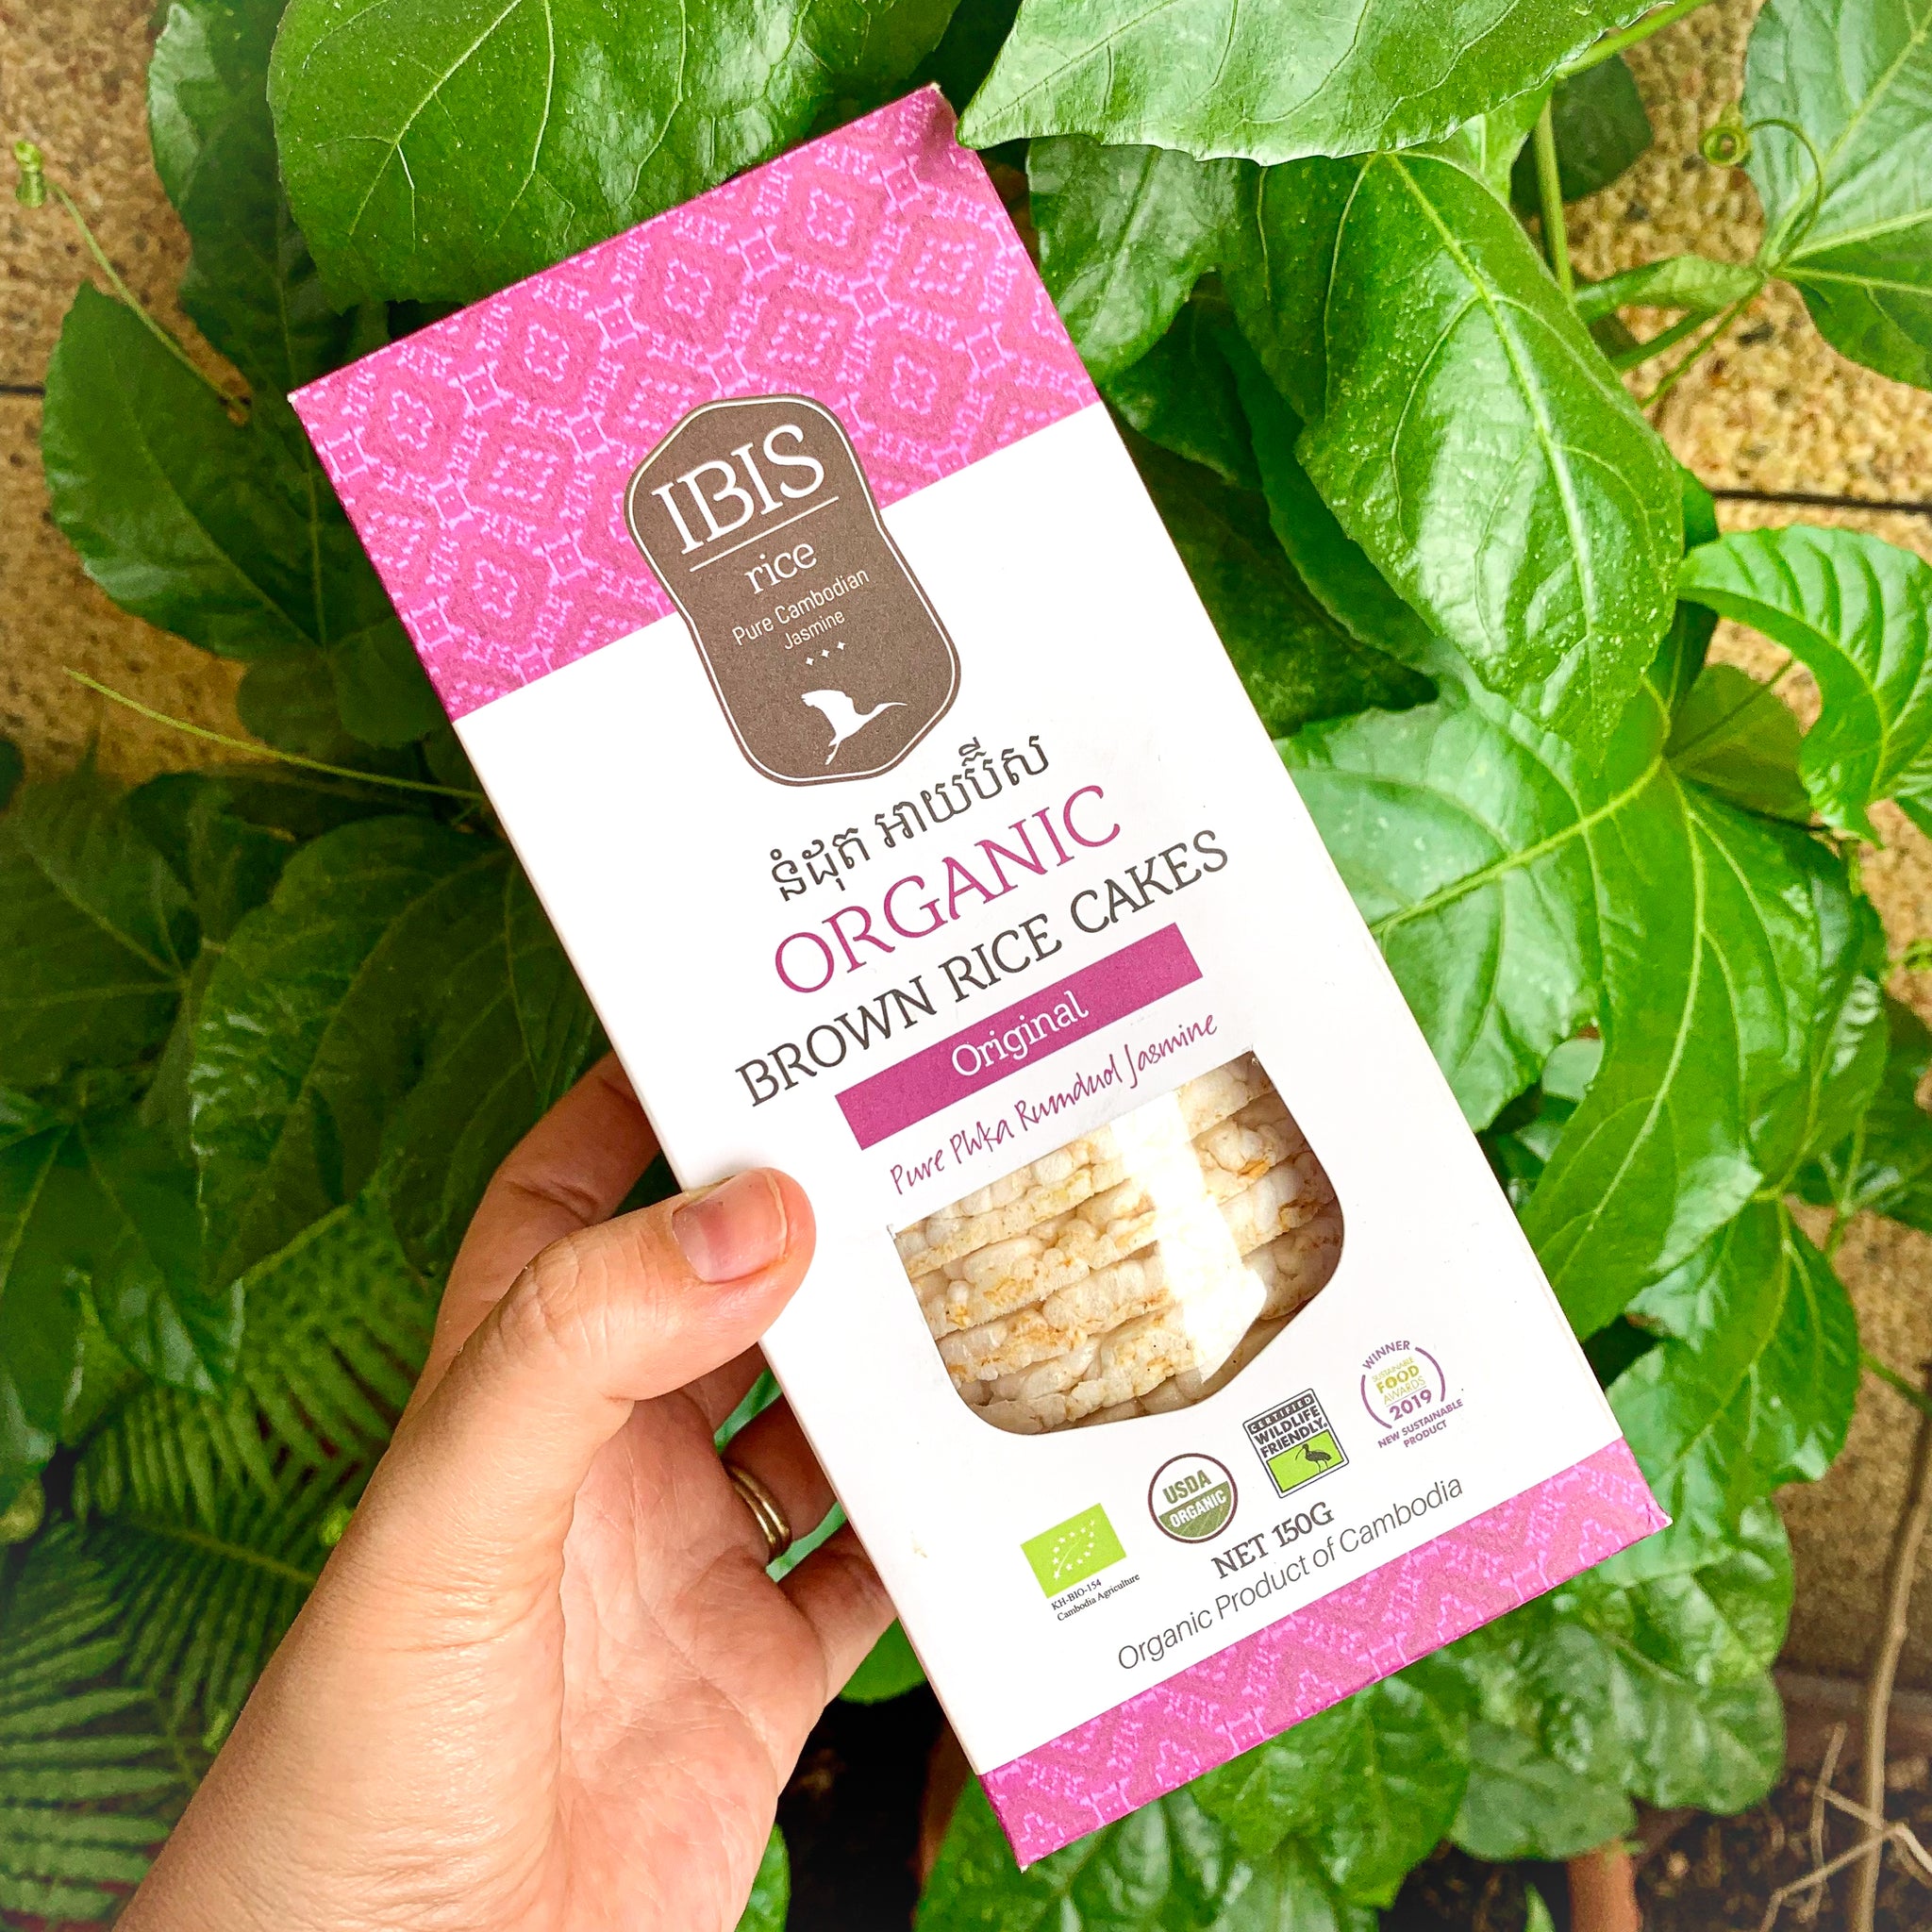 No added sugar or salt, these IBIS Brown Rice Cakes are 100% organic and offer a deliciously nutty, fragrant flavor. An ideal afternoon treat, try topping with peanut butter or jam for added flavor.